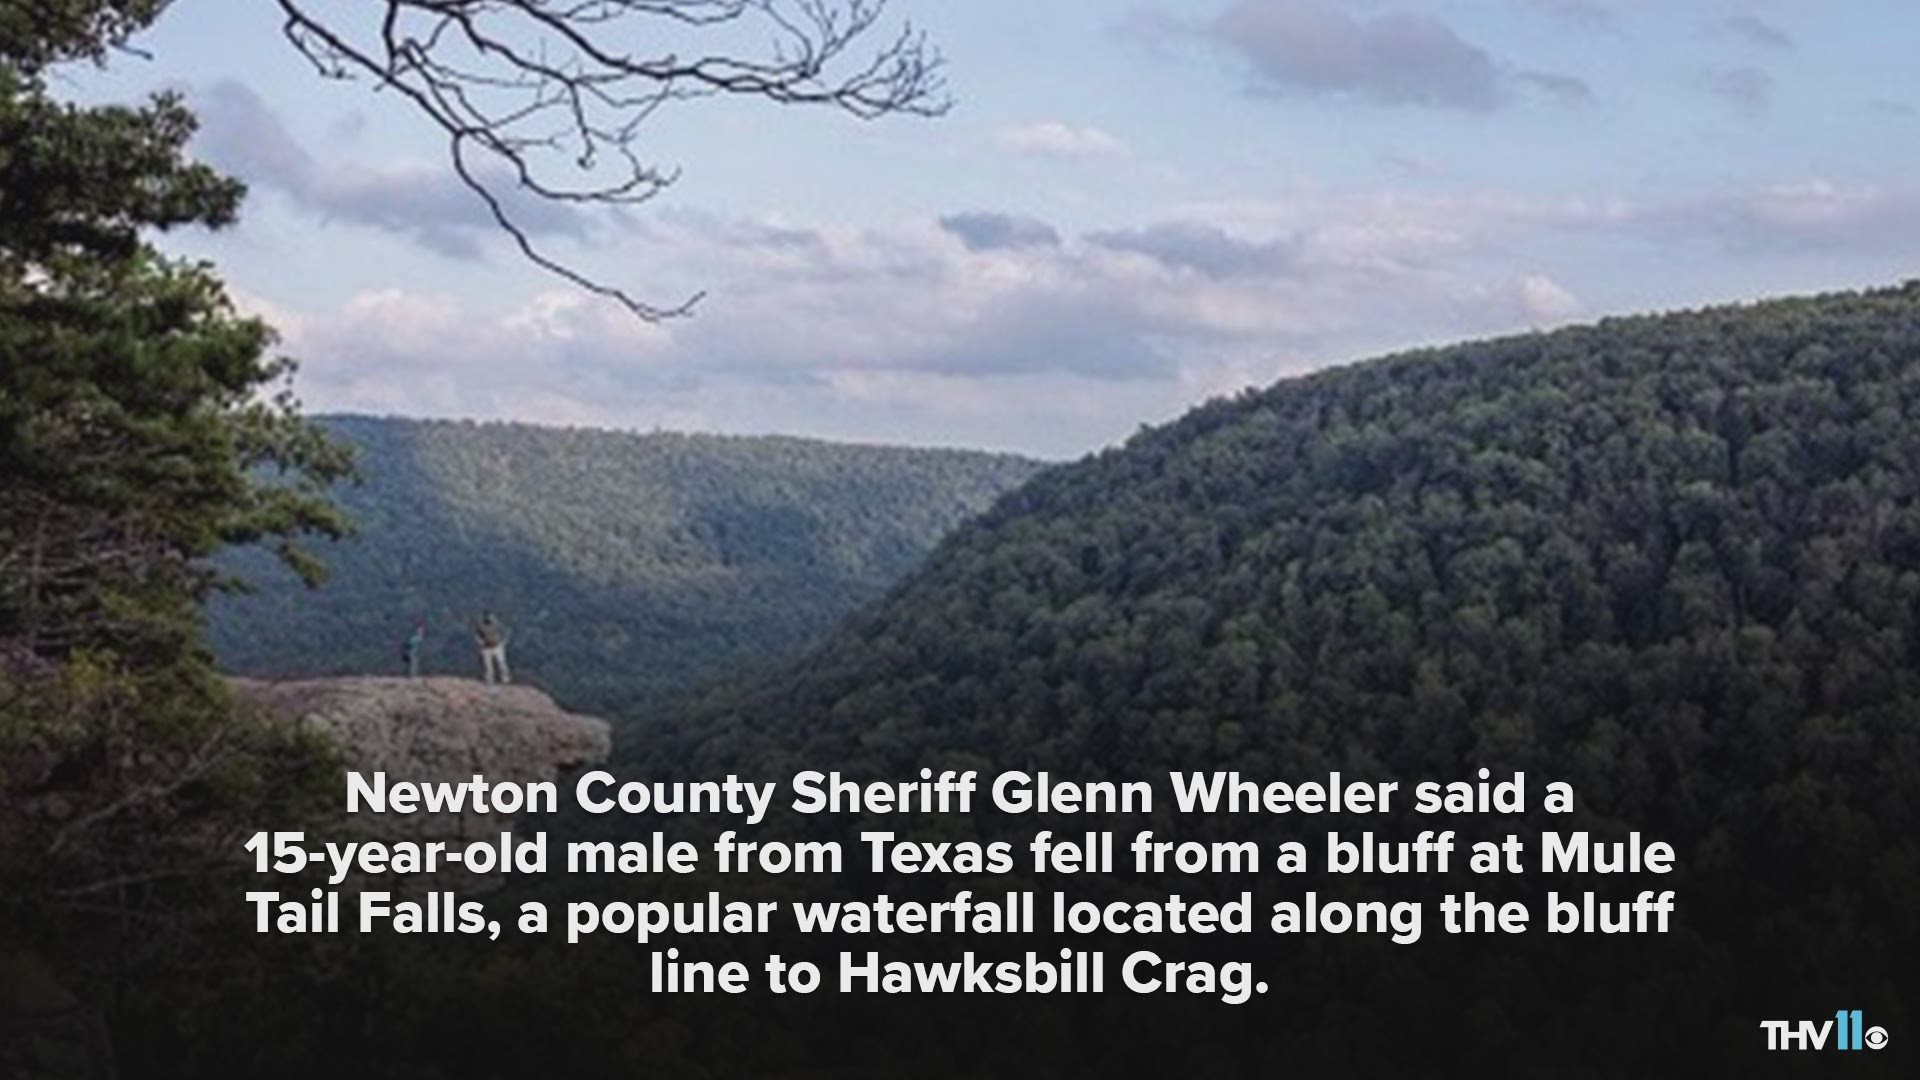 A teen has sustained severe injuries falling 15 feet from a bluff near Hawksbill Crag in Newton County.